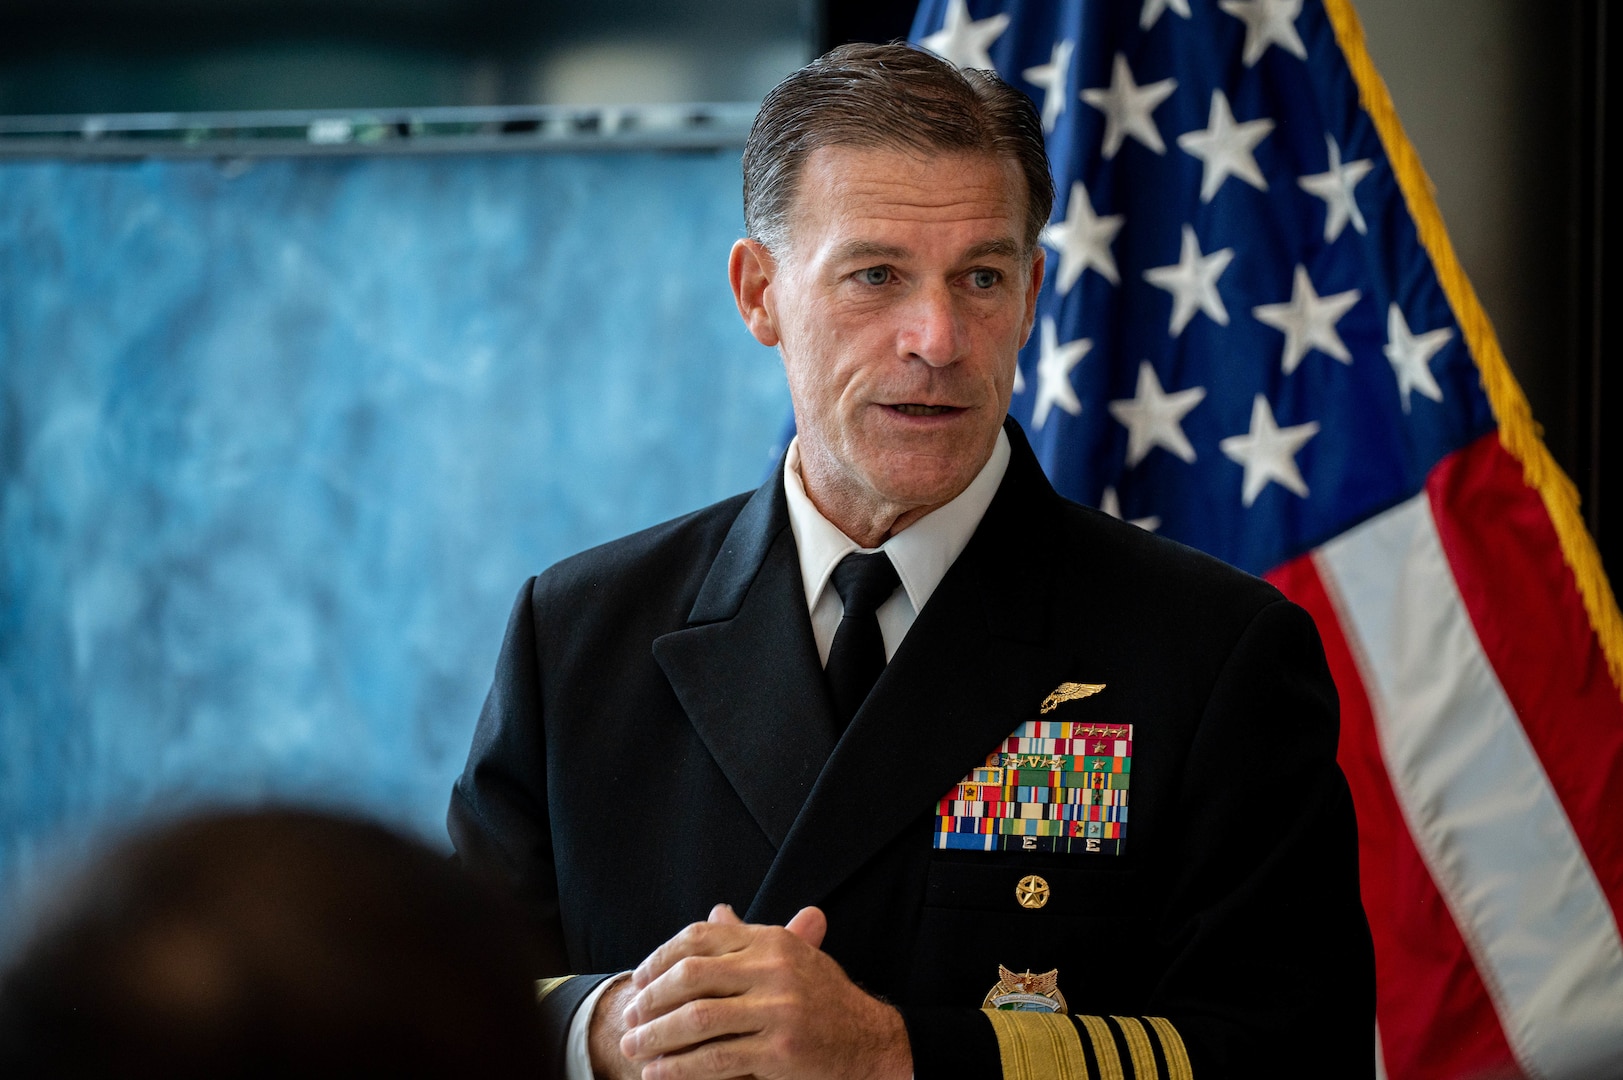 Adm. John C. Aquilino, Commander of U.S. Indo-Pacific Command, speaks at a ceremony to present Air Marshal Kevin R. Short, New Zealand Defense Force Chief of Defence Force, with the Legion of Merit at the U.S. Embassy in Wellington, New Zealand, on April 6, 2024. The Legion of Merit is the highest accolade that the U.S. can bestow upon a foreign leader; it is reserved for individuals who have shown exceptionally meritorious conduct in the performance of outstanding services. USINDOPACOM is committed to enhancing stability in the Indo-Pacific region by promoting security cooperation, encouraging peaceful development, responding to contingencies, deterring aggression and, when necessary, fighting to win. (U.S. Navy photo by Chief Mass Communication Specialist Shannon M. Smith)